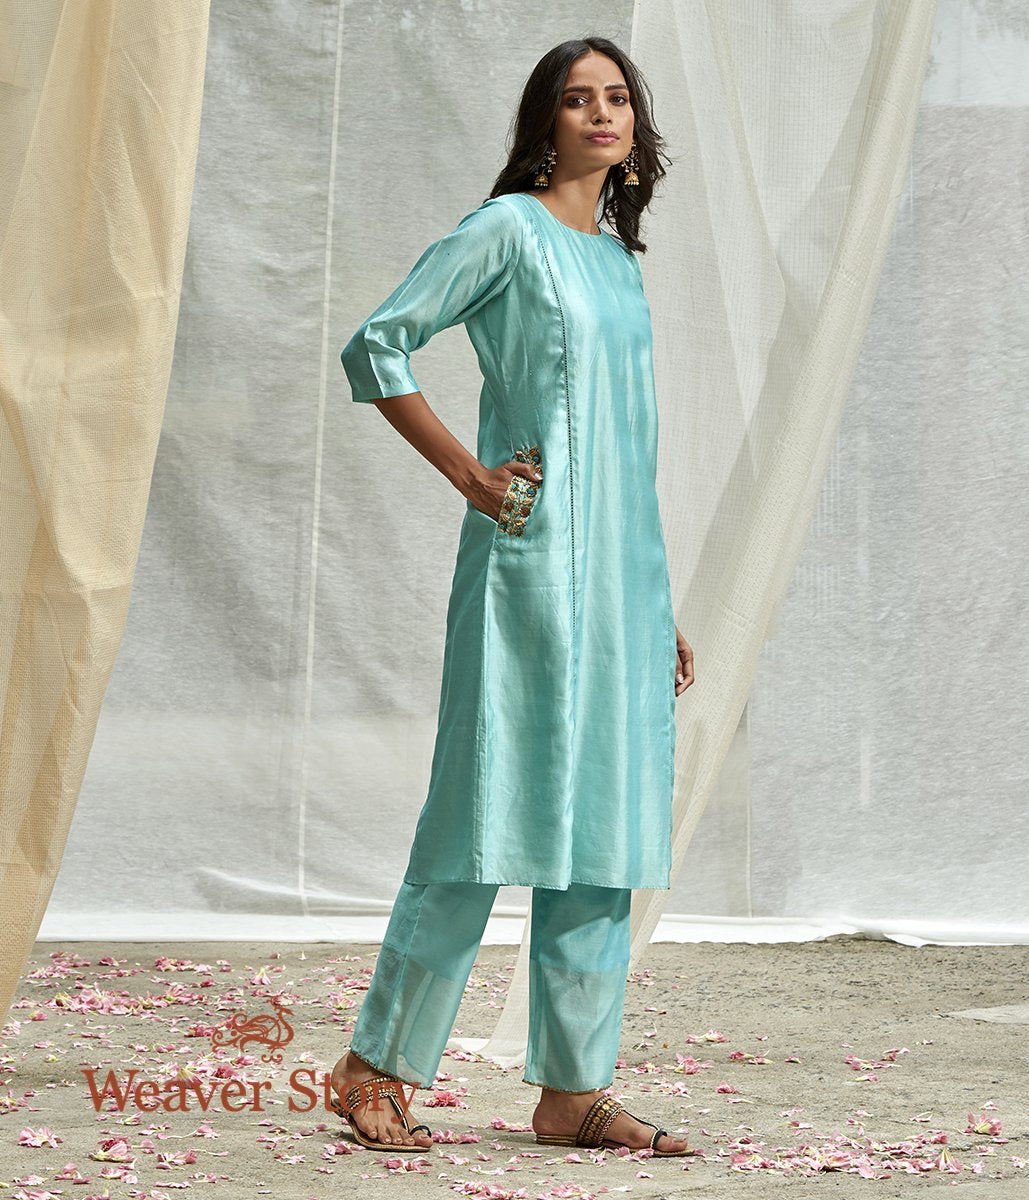 Handwoven_Aqua_Blue_Tunic_and_Pants_Set_with_Pocket_Embroidery_WeaverStory_01